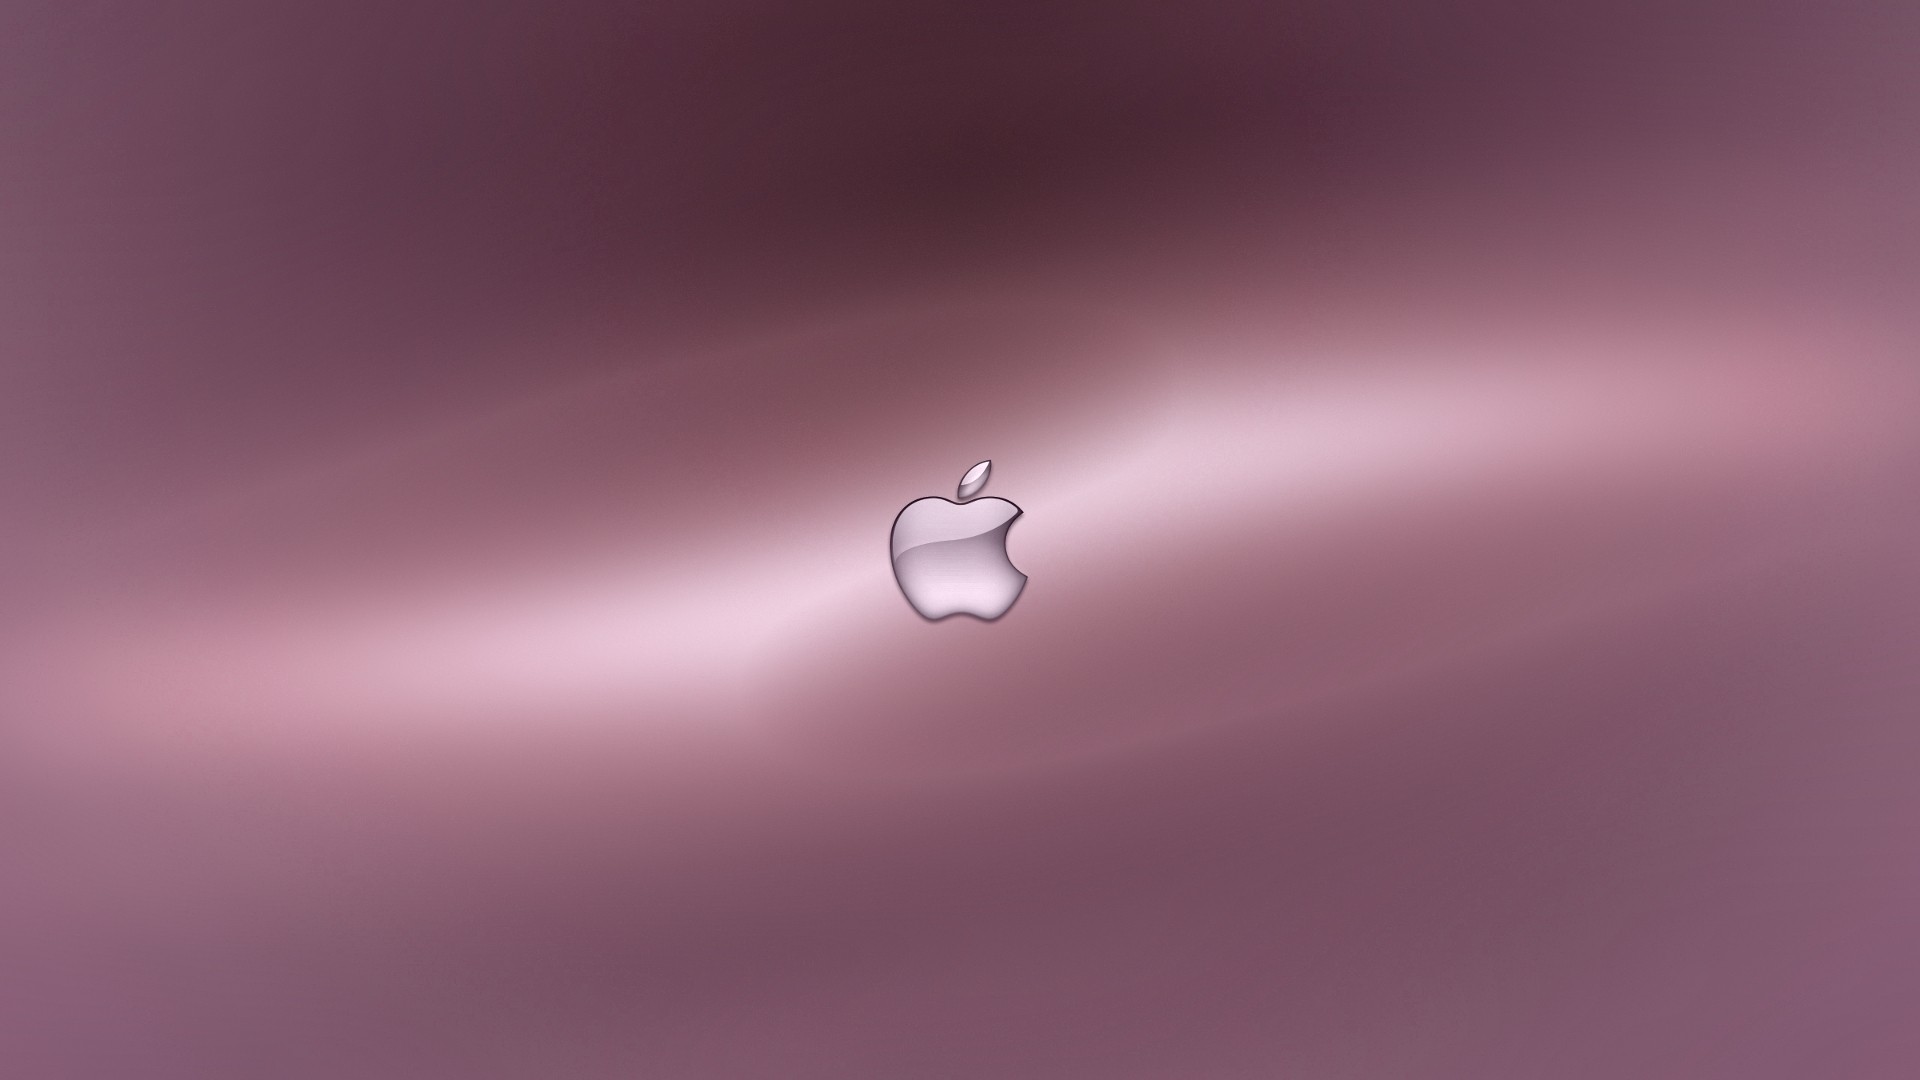 Rate Select Rating Give Purple Apple Logo